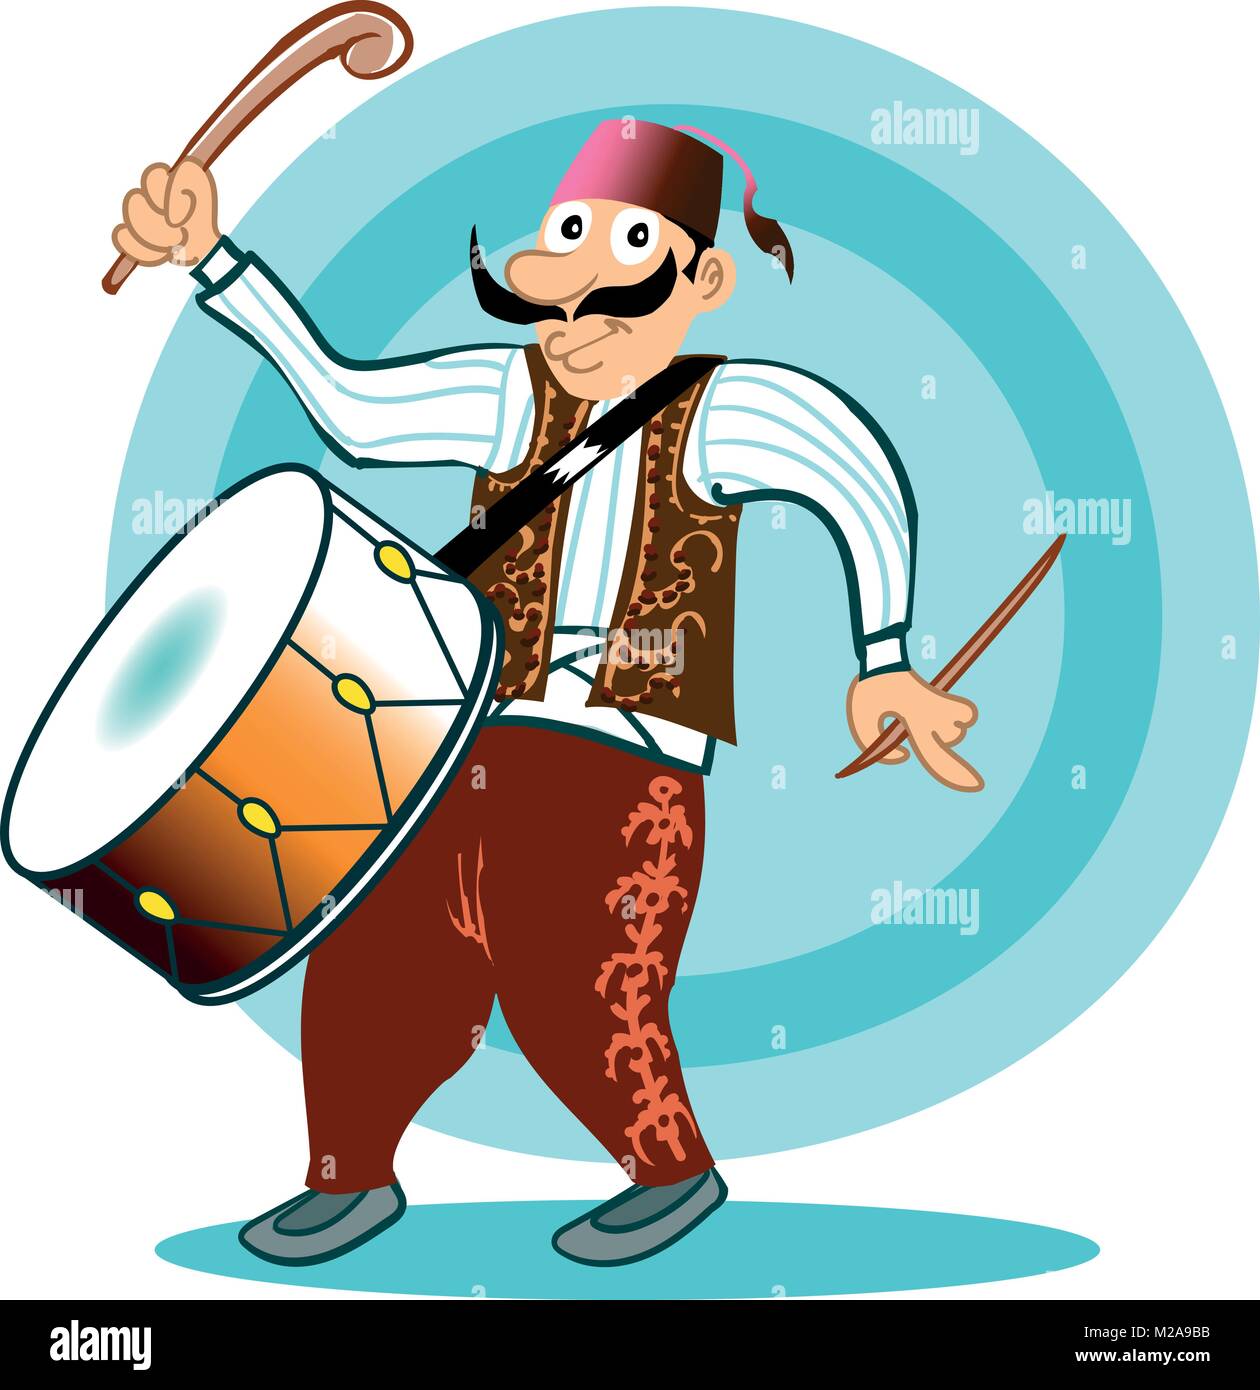 ramadan drummer with traditional clothes cartoon style illustration Stock Vector